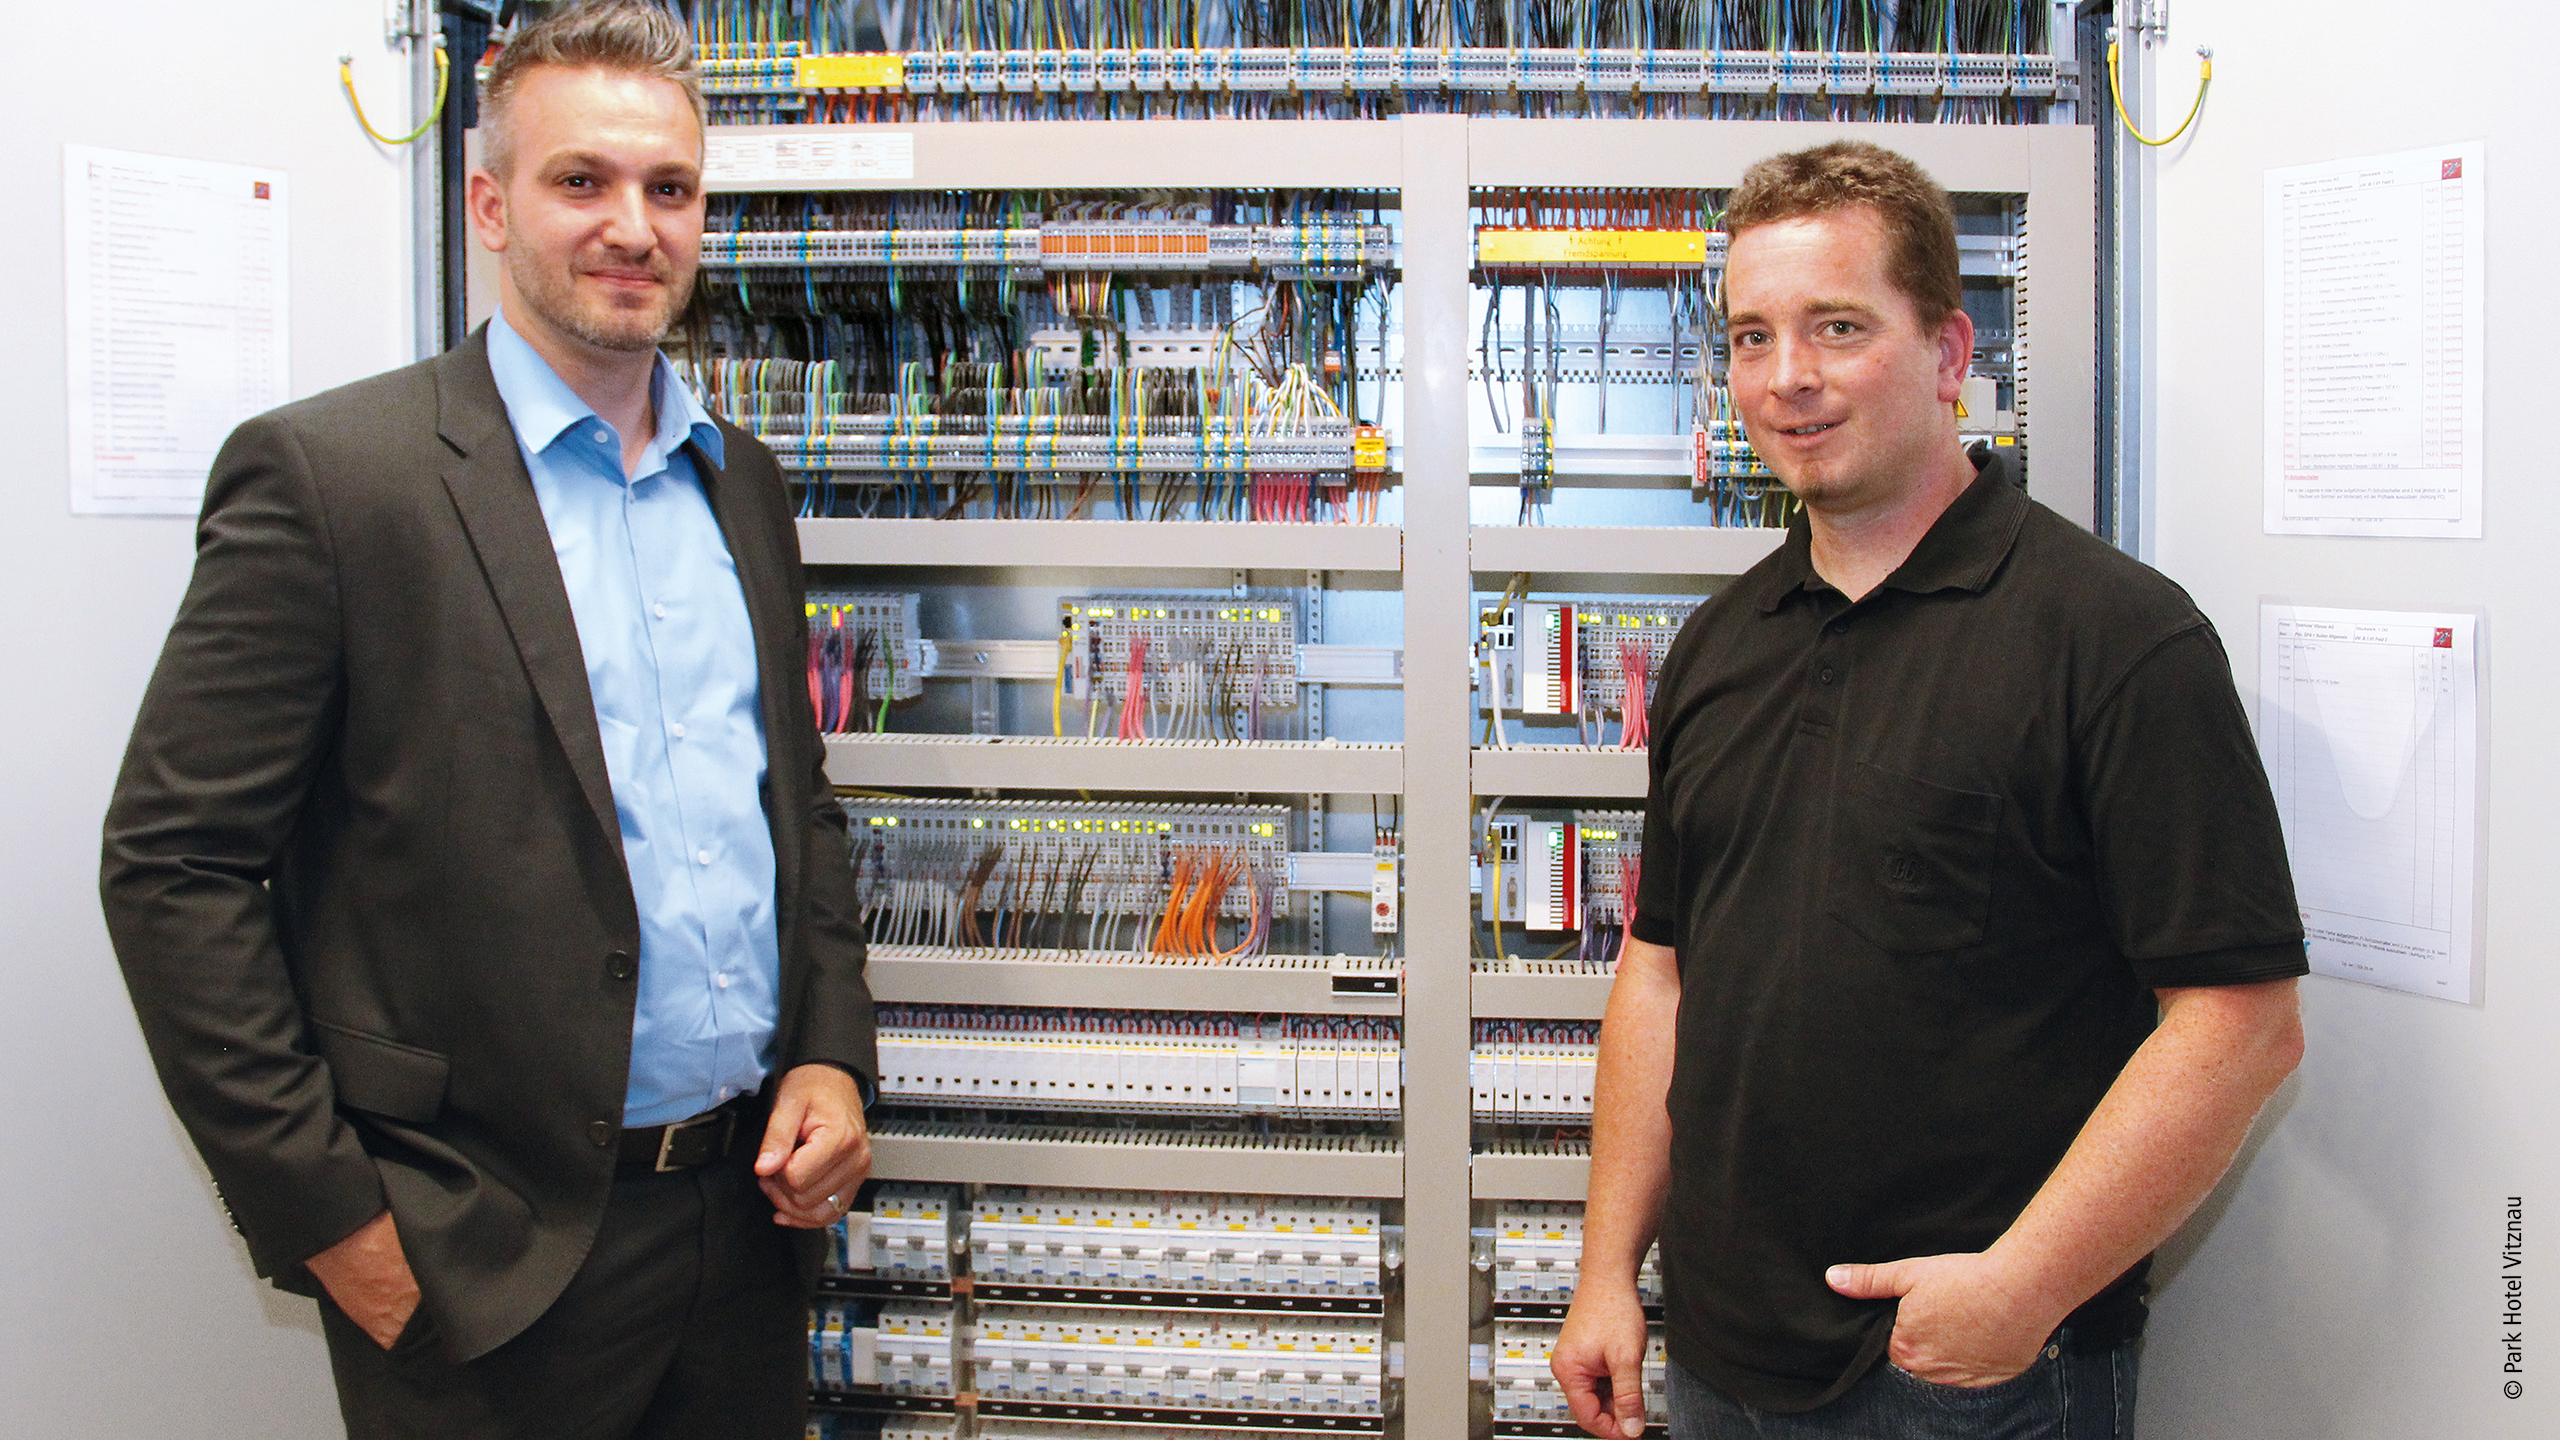 (from left) Andreas Hutter, Project Manager from Panthek, and Daniel Rothenberger, Sales Manager Building Automation at Beckhoff Switzerland, in front of one of the floor distributors. 